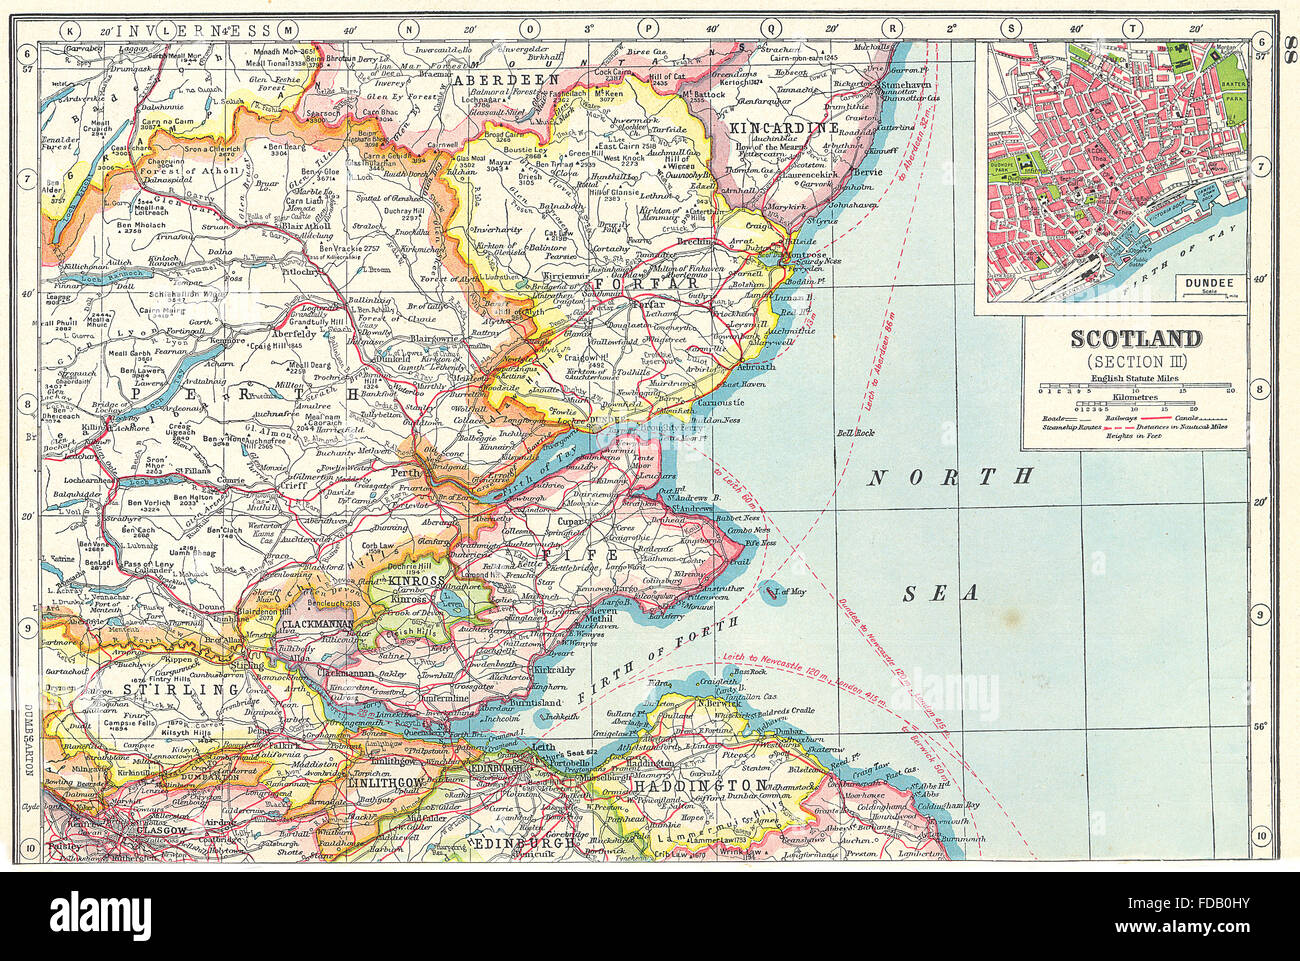 Firths of Forth & Tay: Fife Forfar Perthshire. Inset Dundee. Scotland, 1920 map Stock Photo